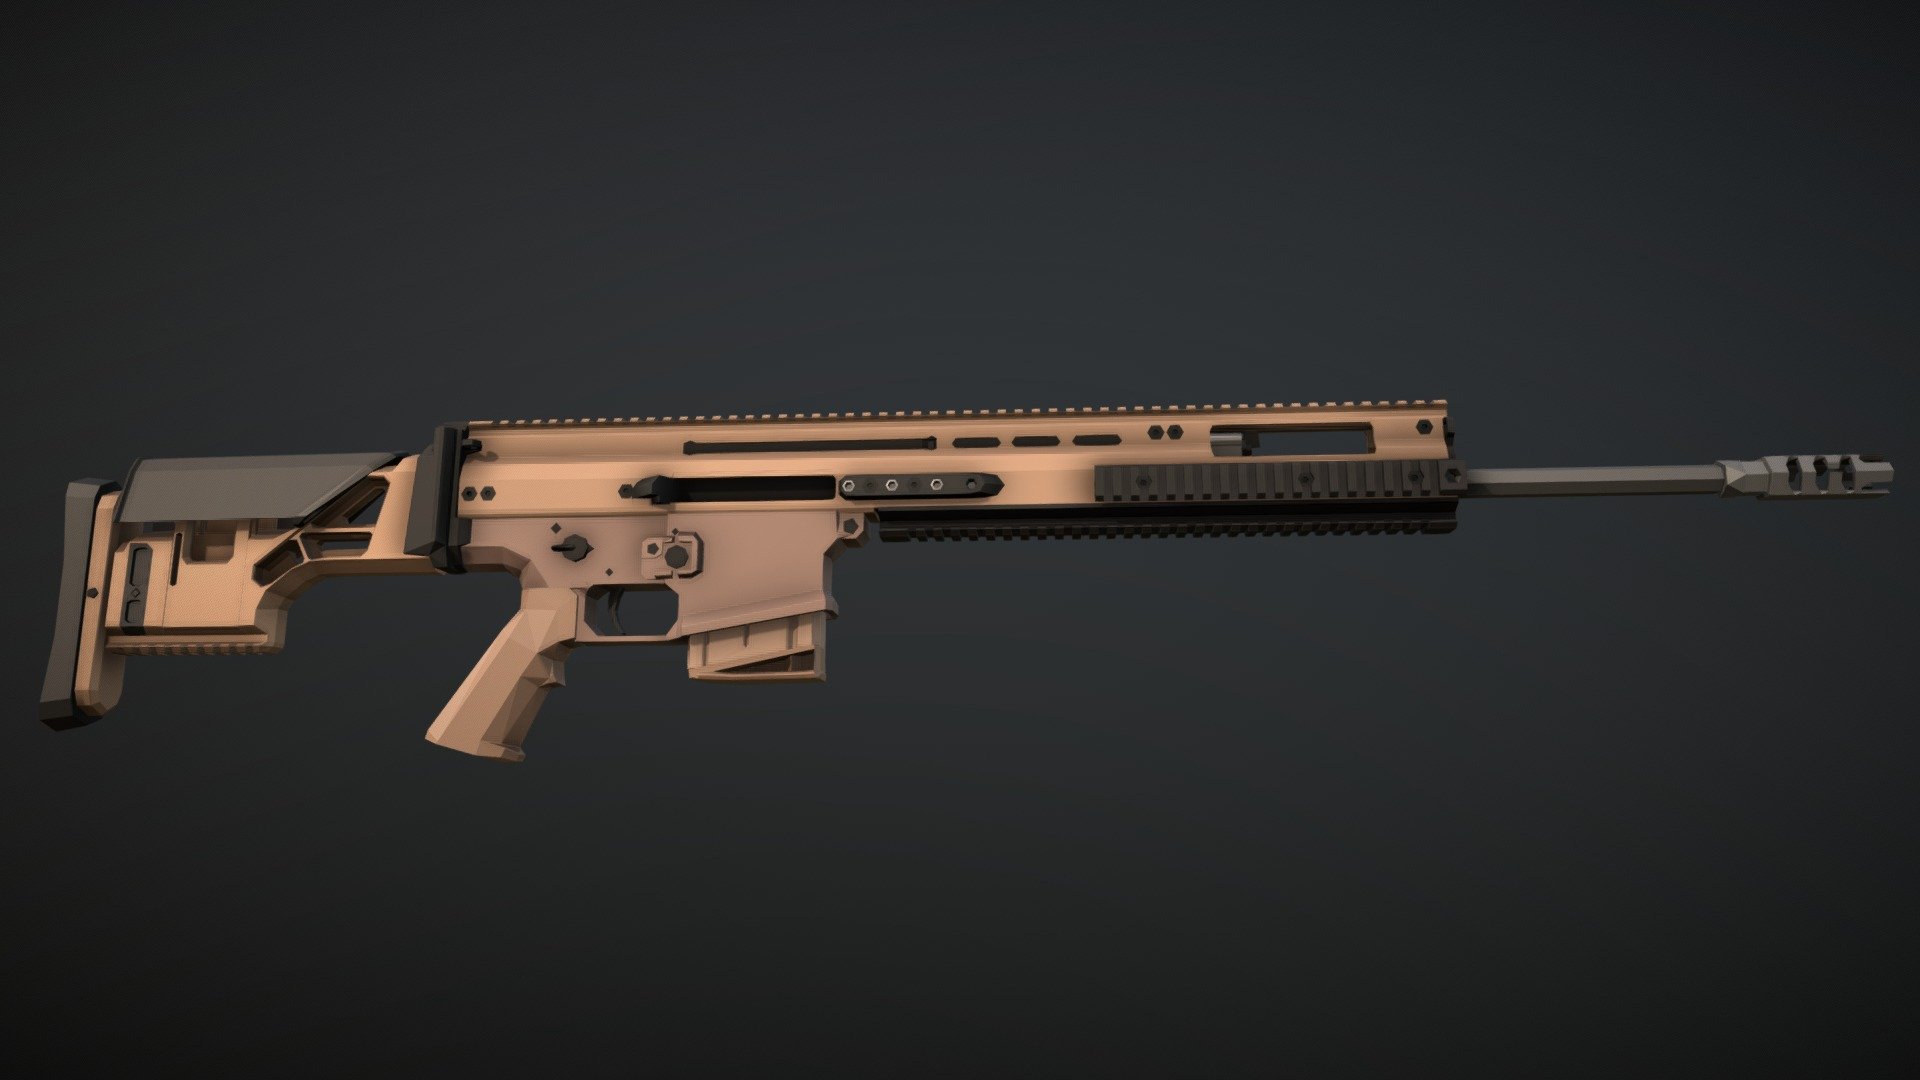 low poly model of the sniper/DMR variant of the FN SCAR-H, with longer receiver, barrel, ten round magazine and fixed adjustable stock.

this doesn't have a scope, but I'll hopefully soon release a variant with scope and some other cool things 3d model